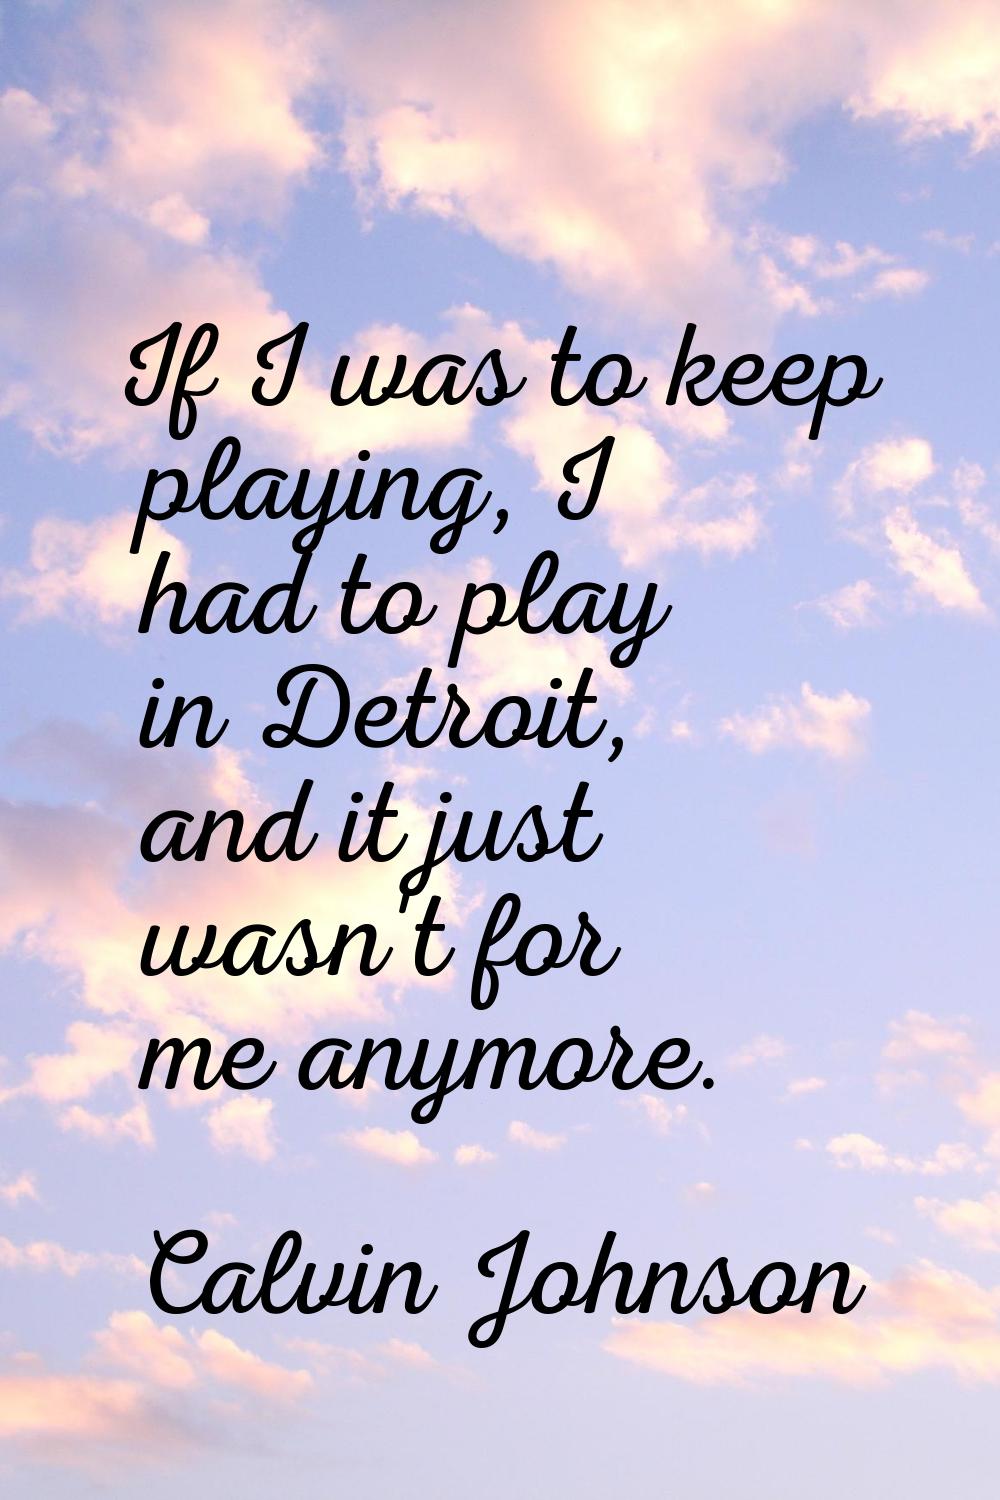 If I was to keep playing, I had to play in Detroit, and it just wasn't for me anymore.